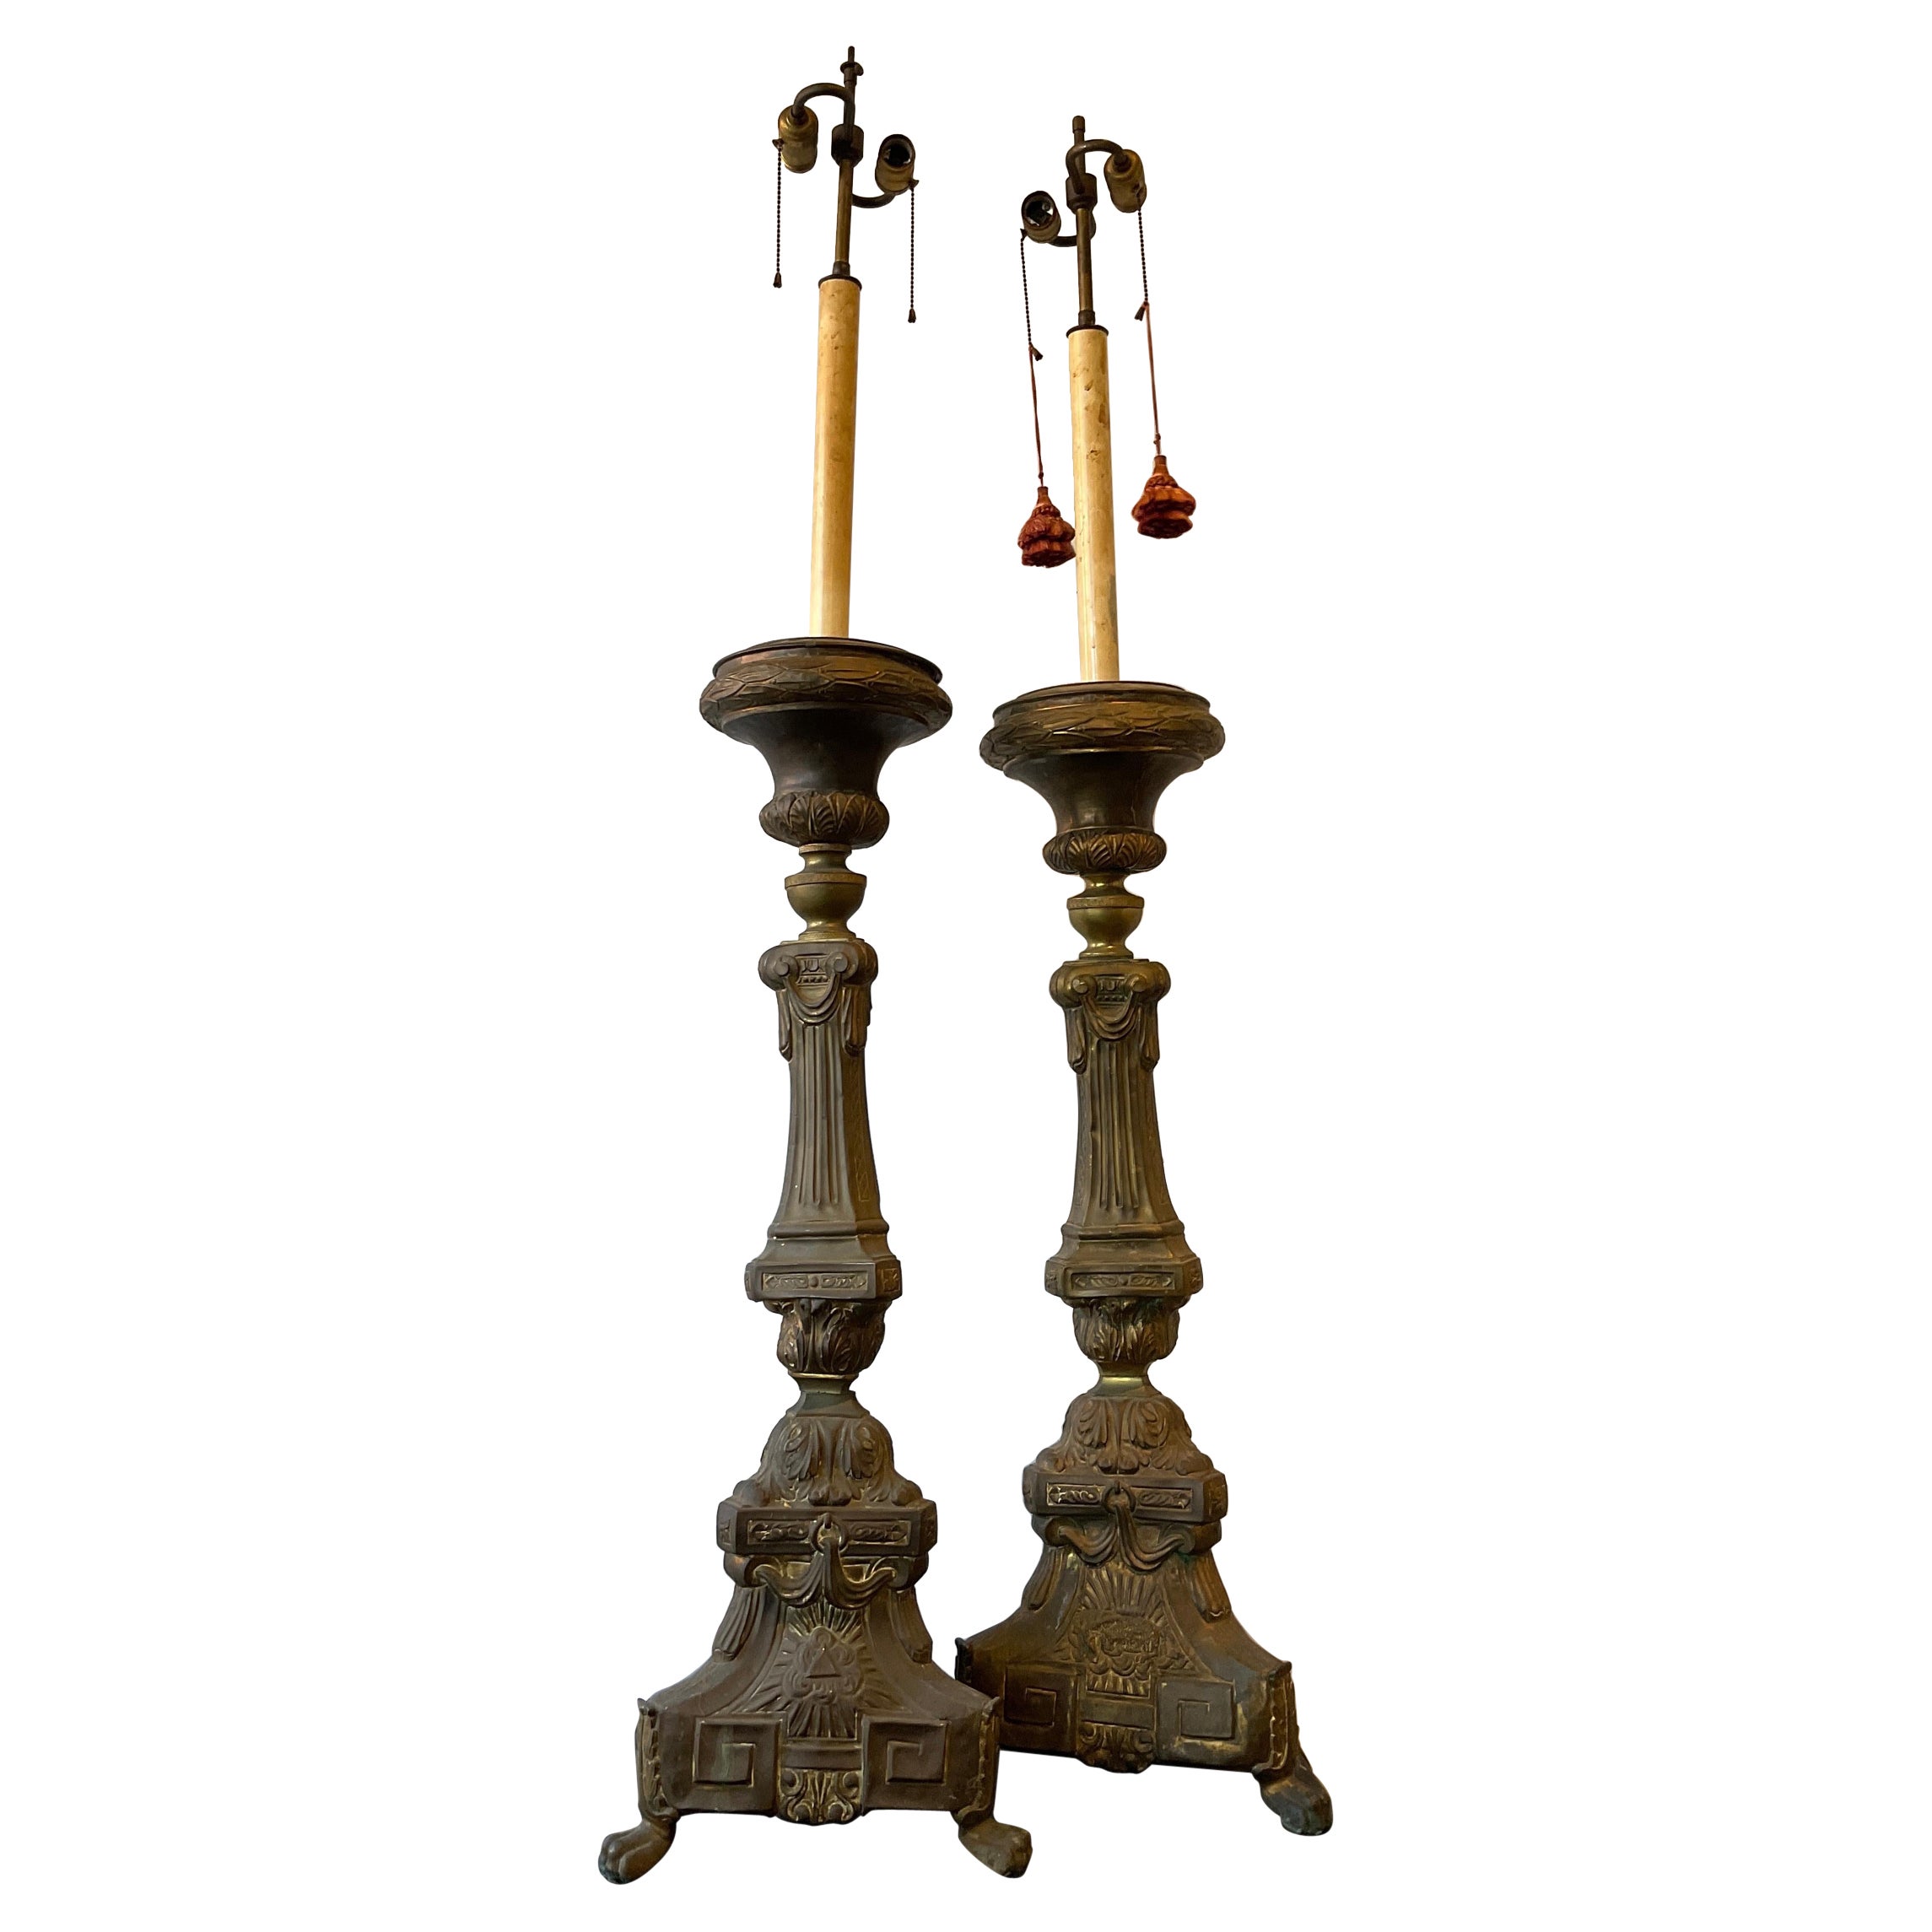 Pair of Tall 1870s Brass Church Candlestick Lamps For Sale